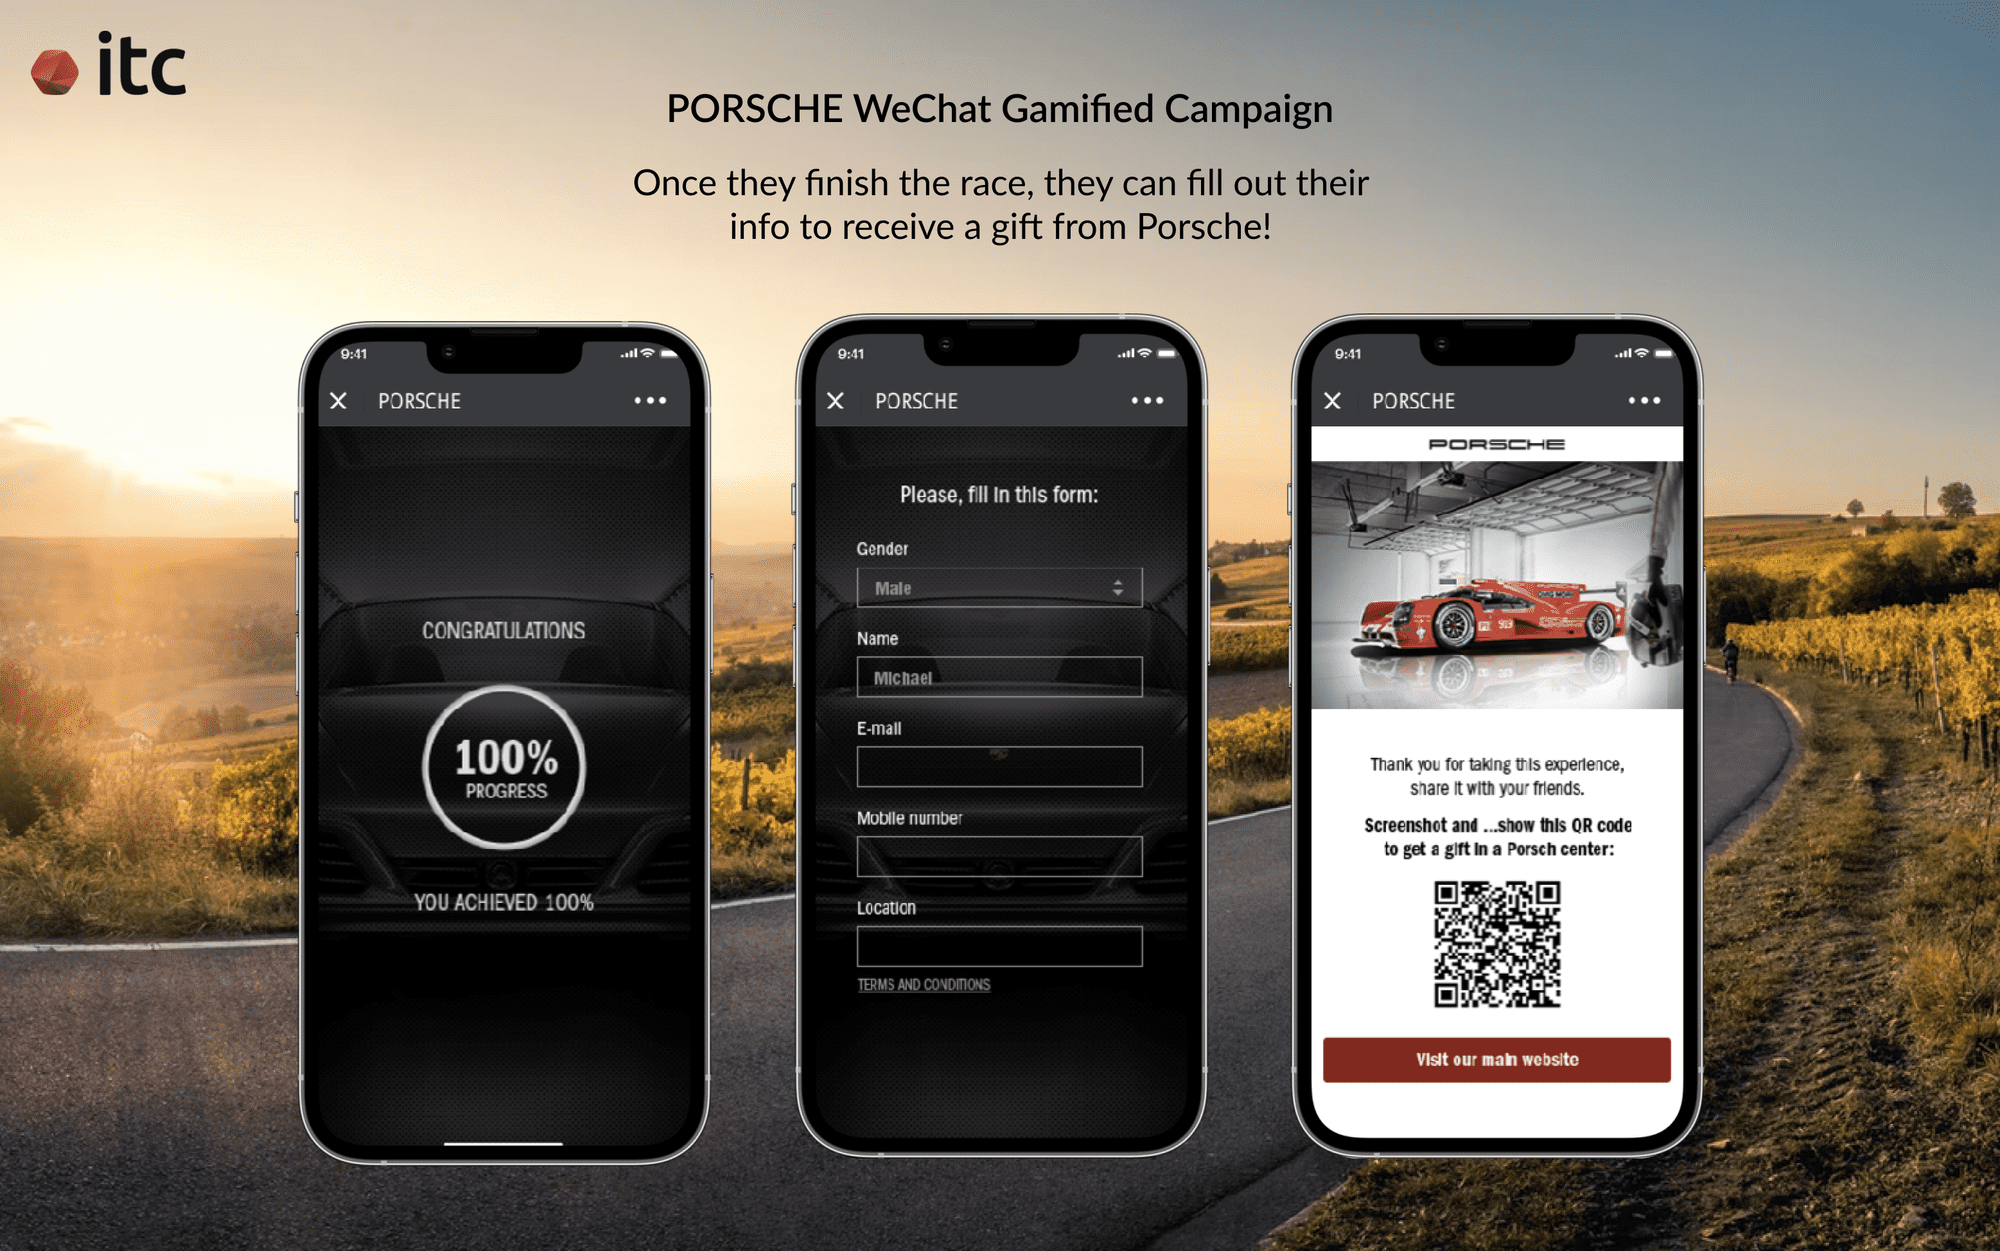 When the player finishes the race, they can receive exclusive gifts from Porsche